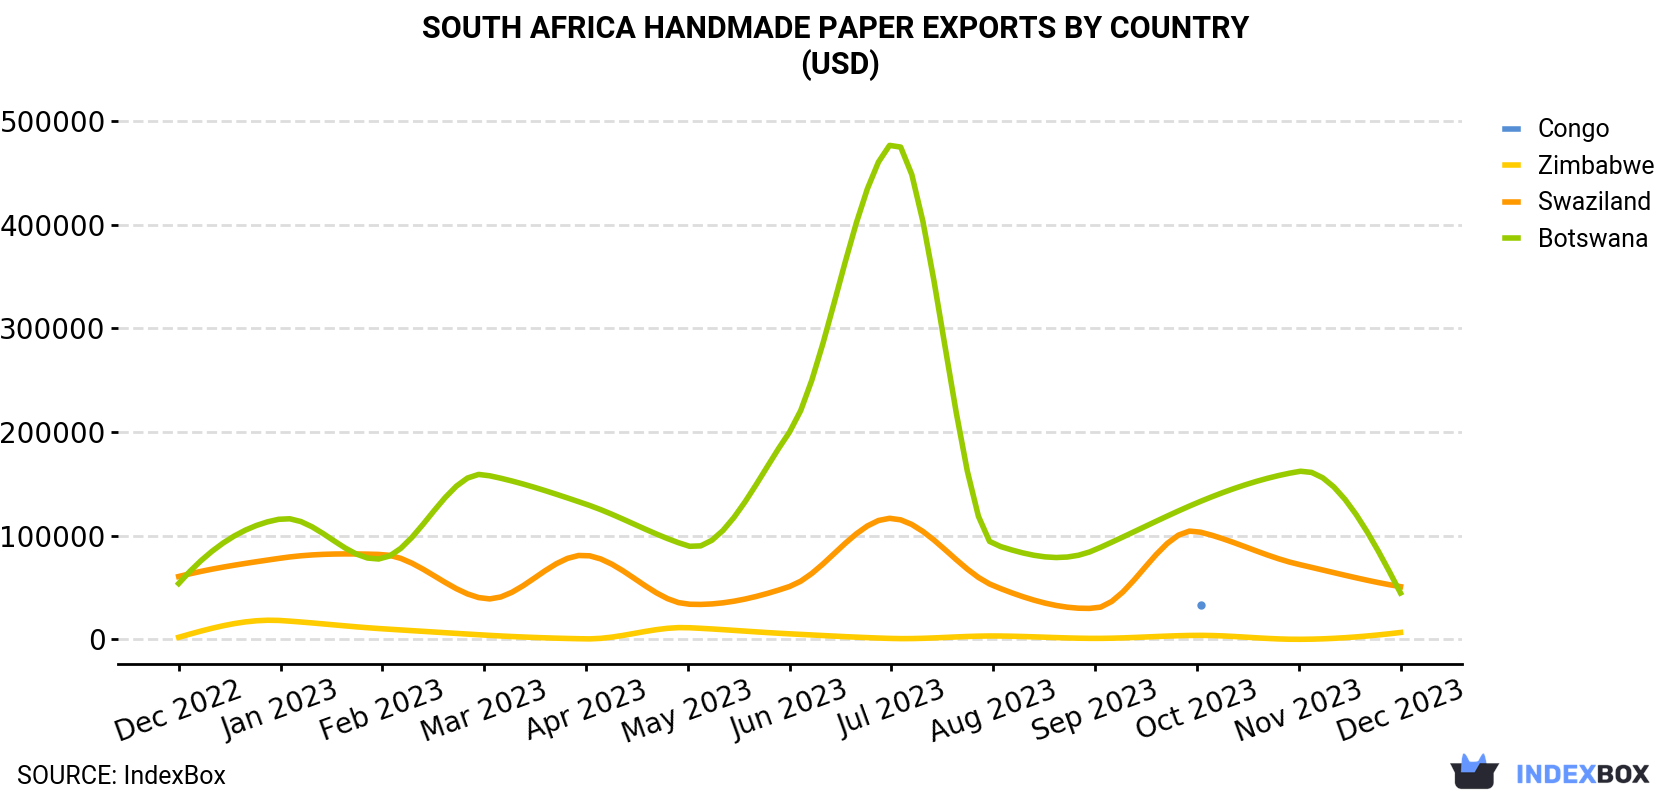 South Africa Handmade Paper Exports By Country (USD)